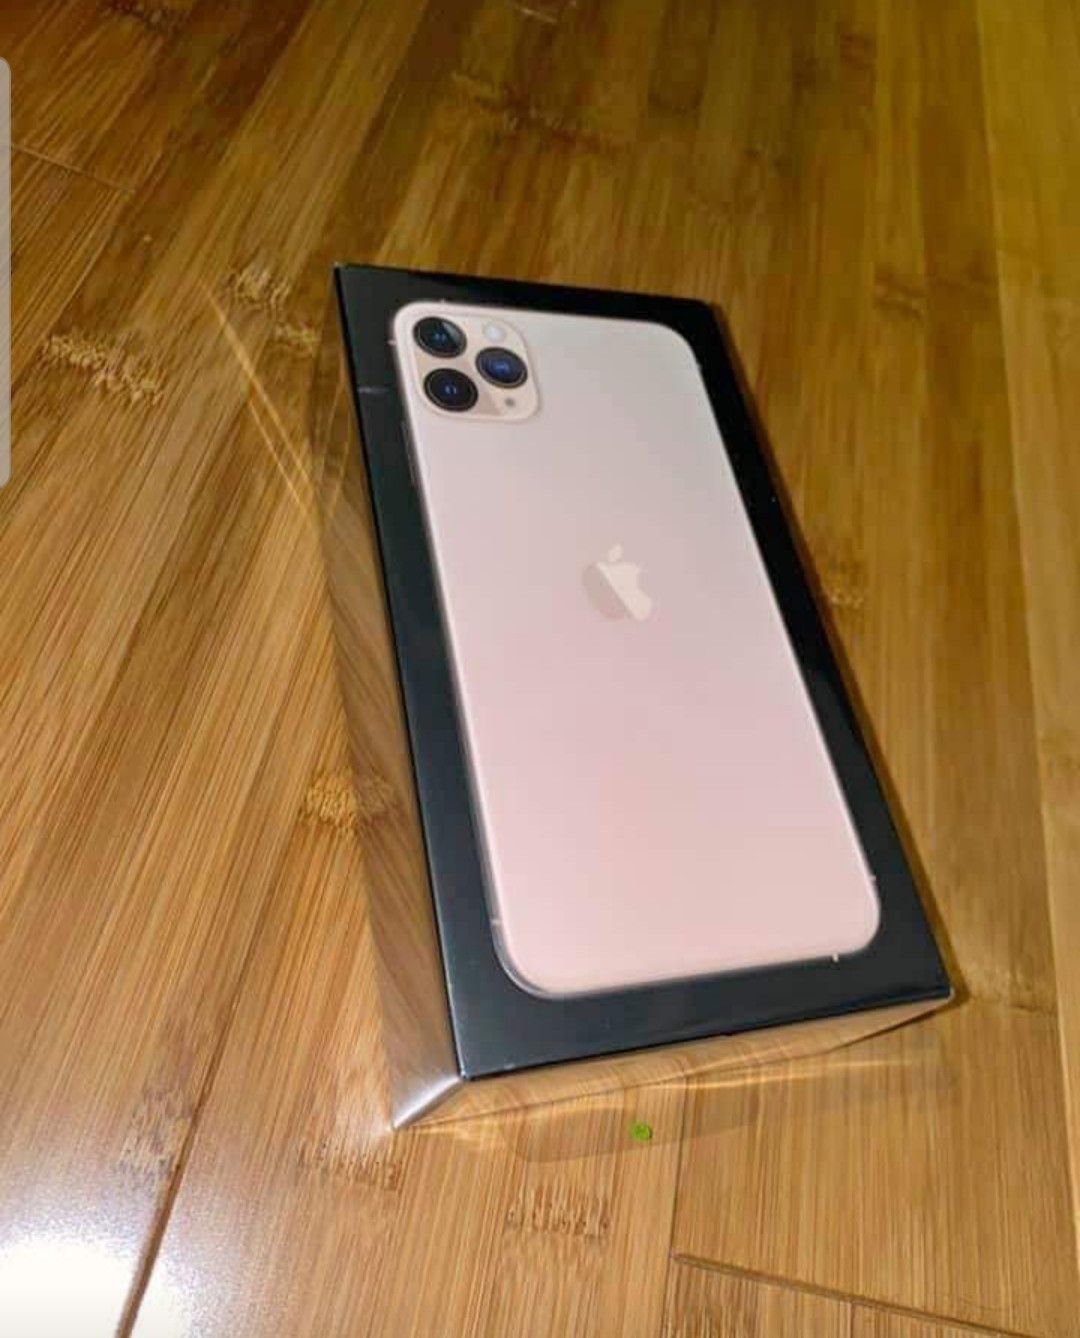 Iphone 11 pro max factory unblocked